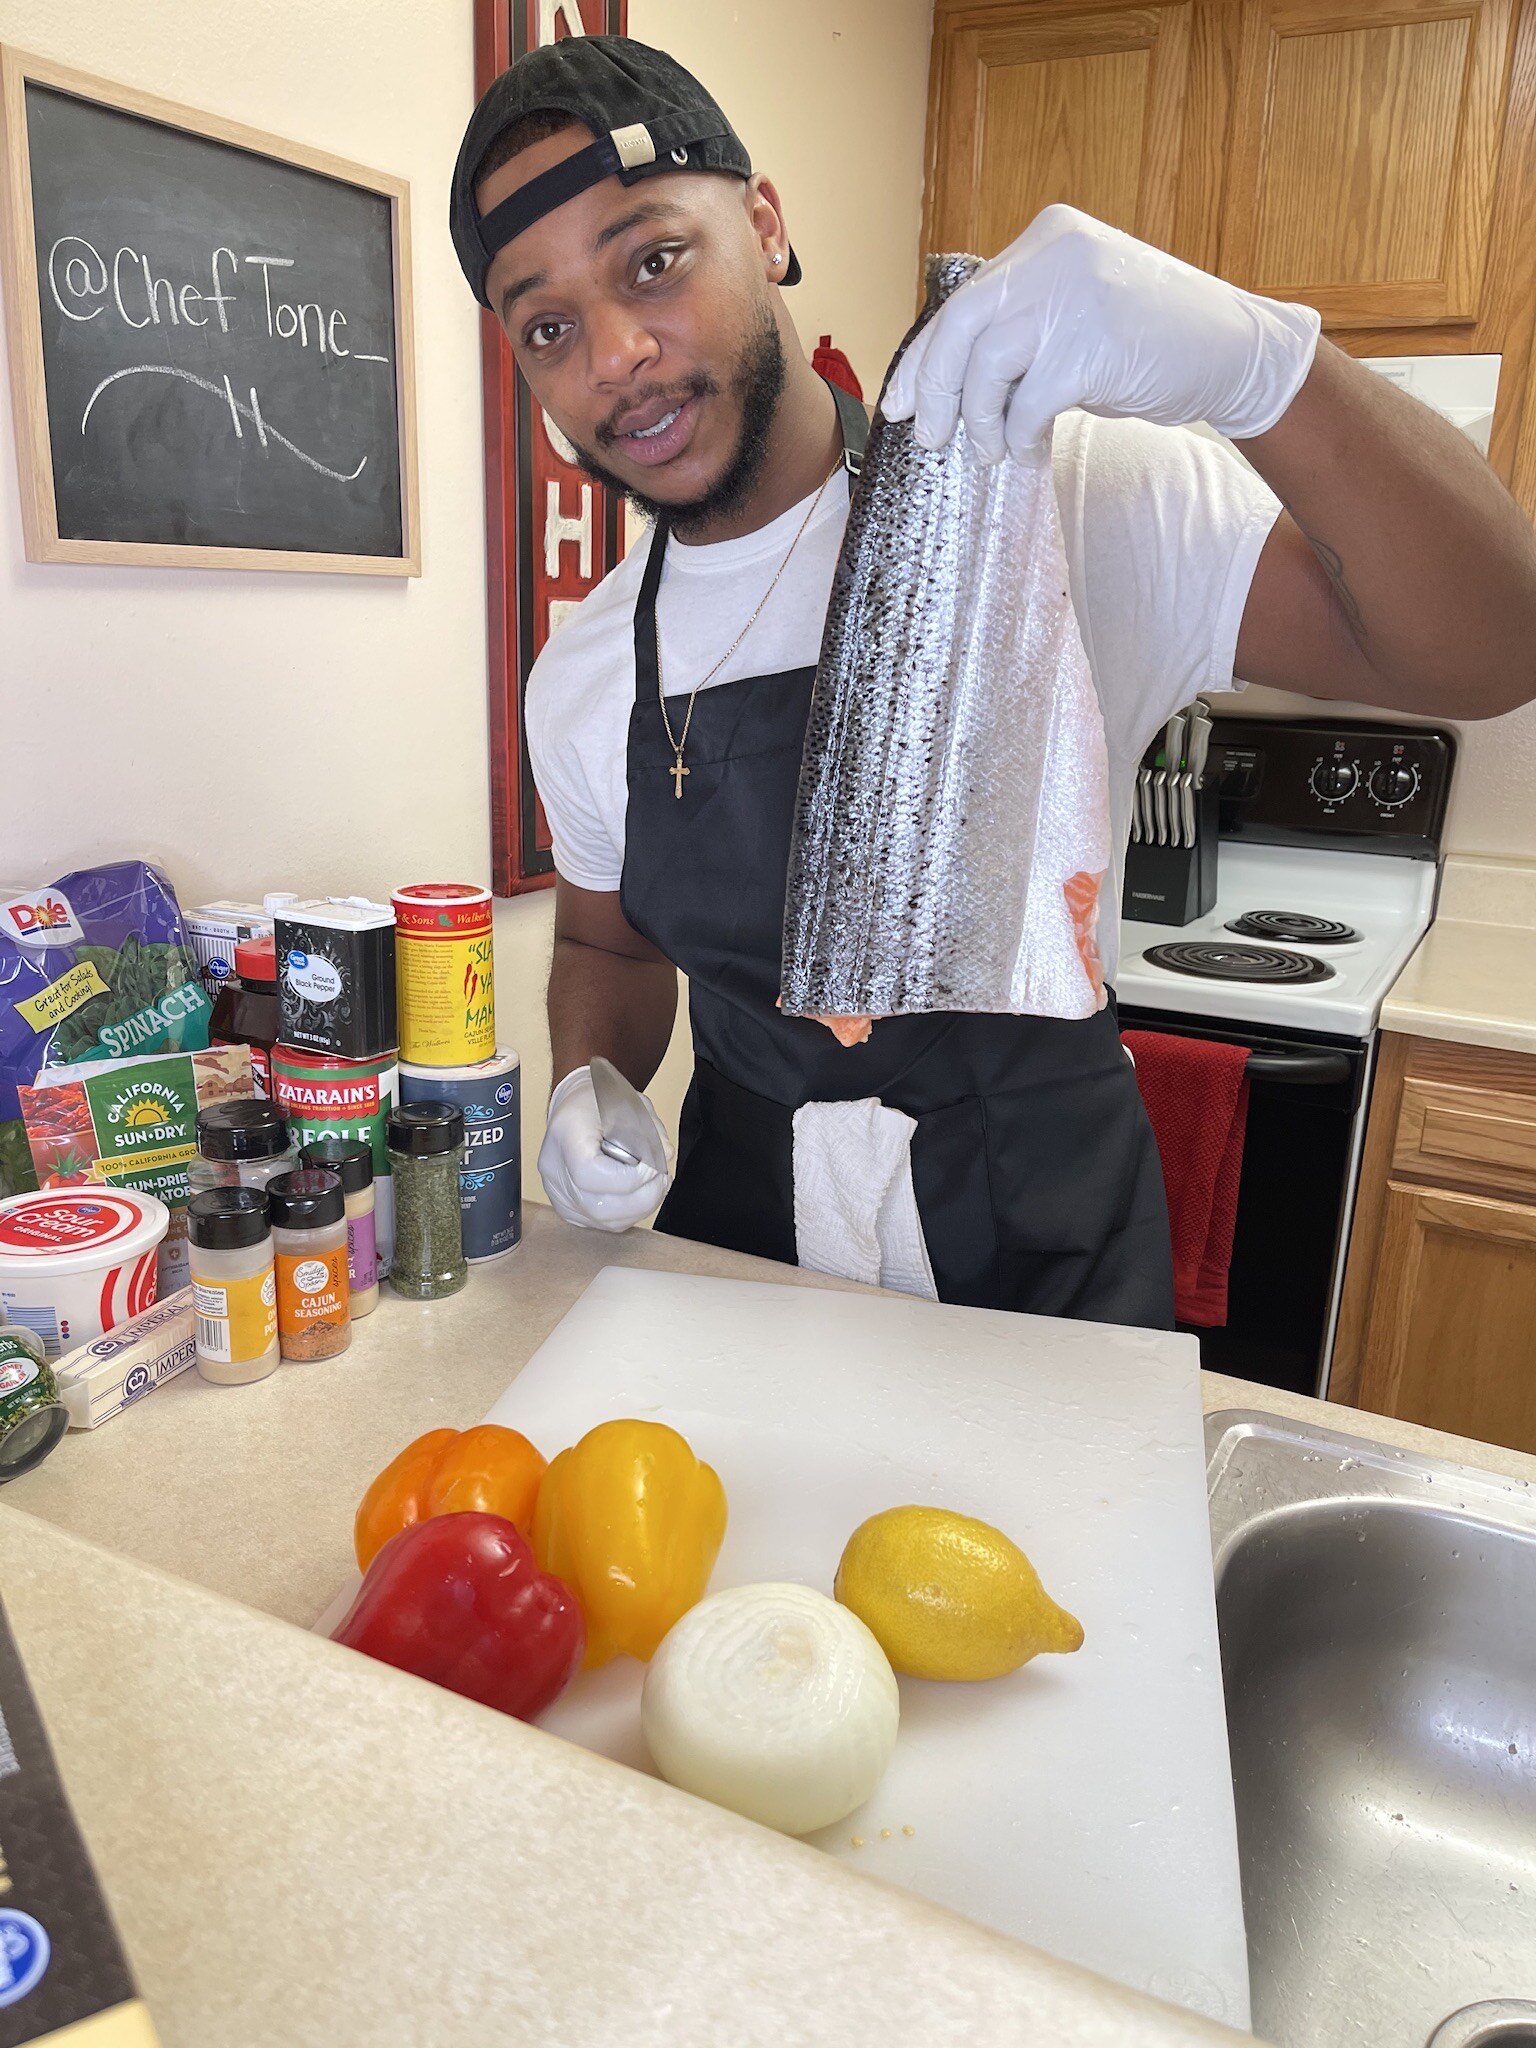 Chef Tone Wilson films a video for TikTok in his home kitchen.